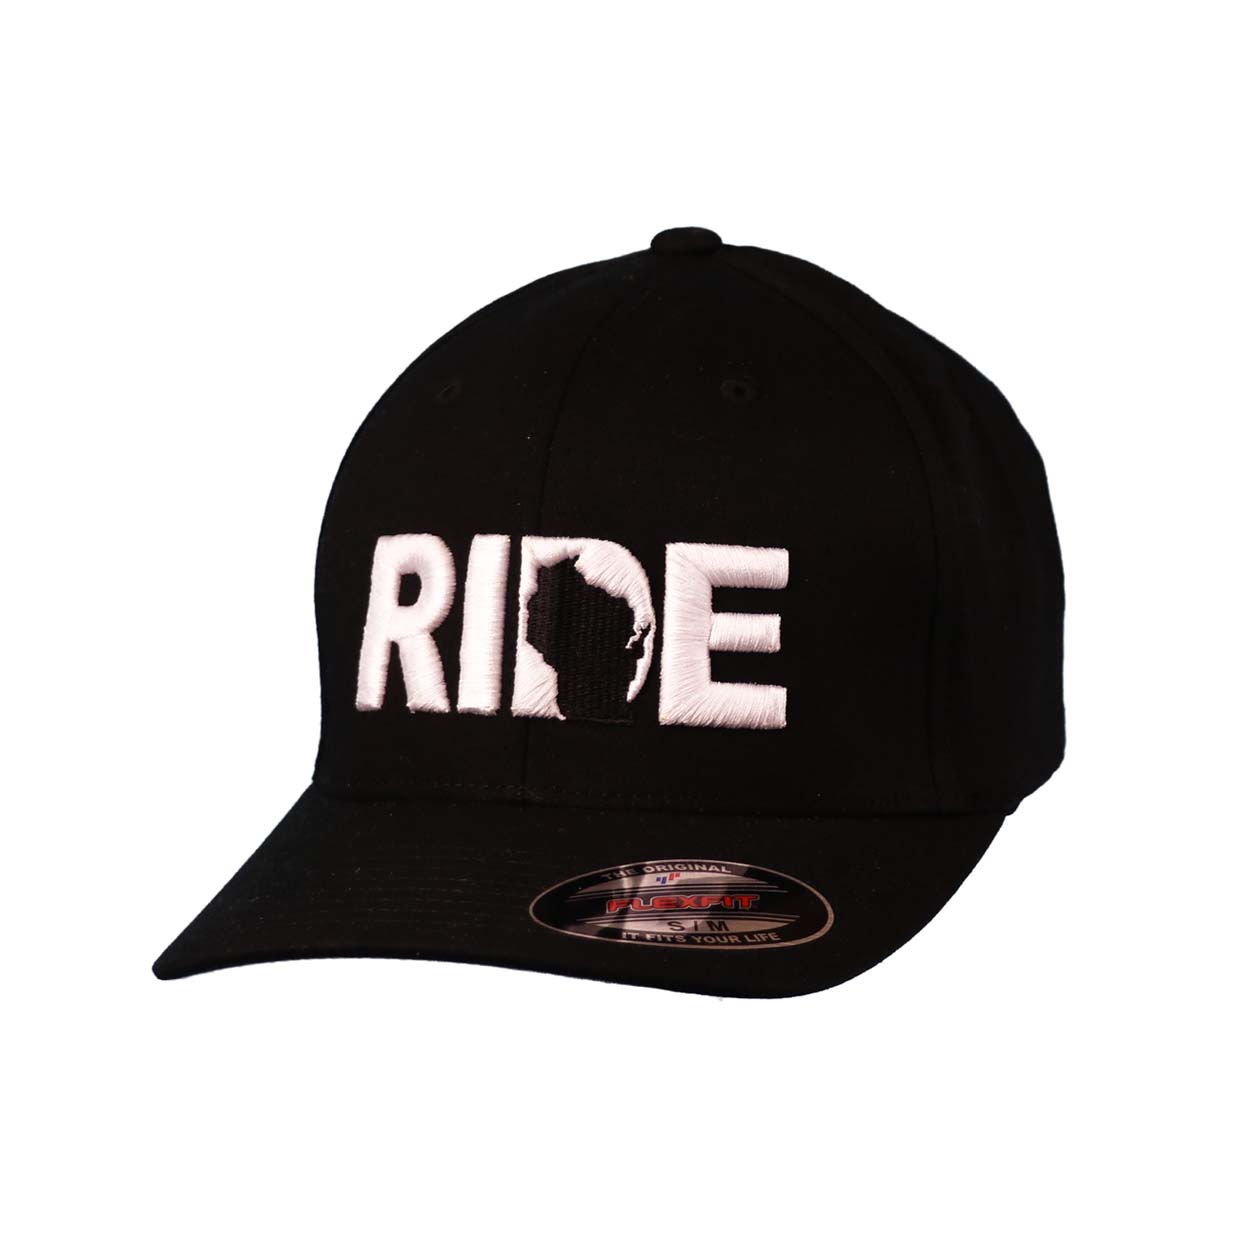 Ride Wisconsin Classic Embroidered Trucker Flex Fit Hat Black/White